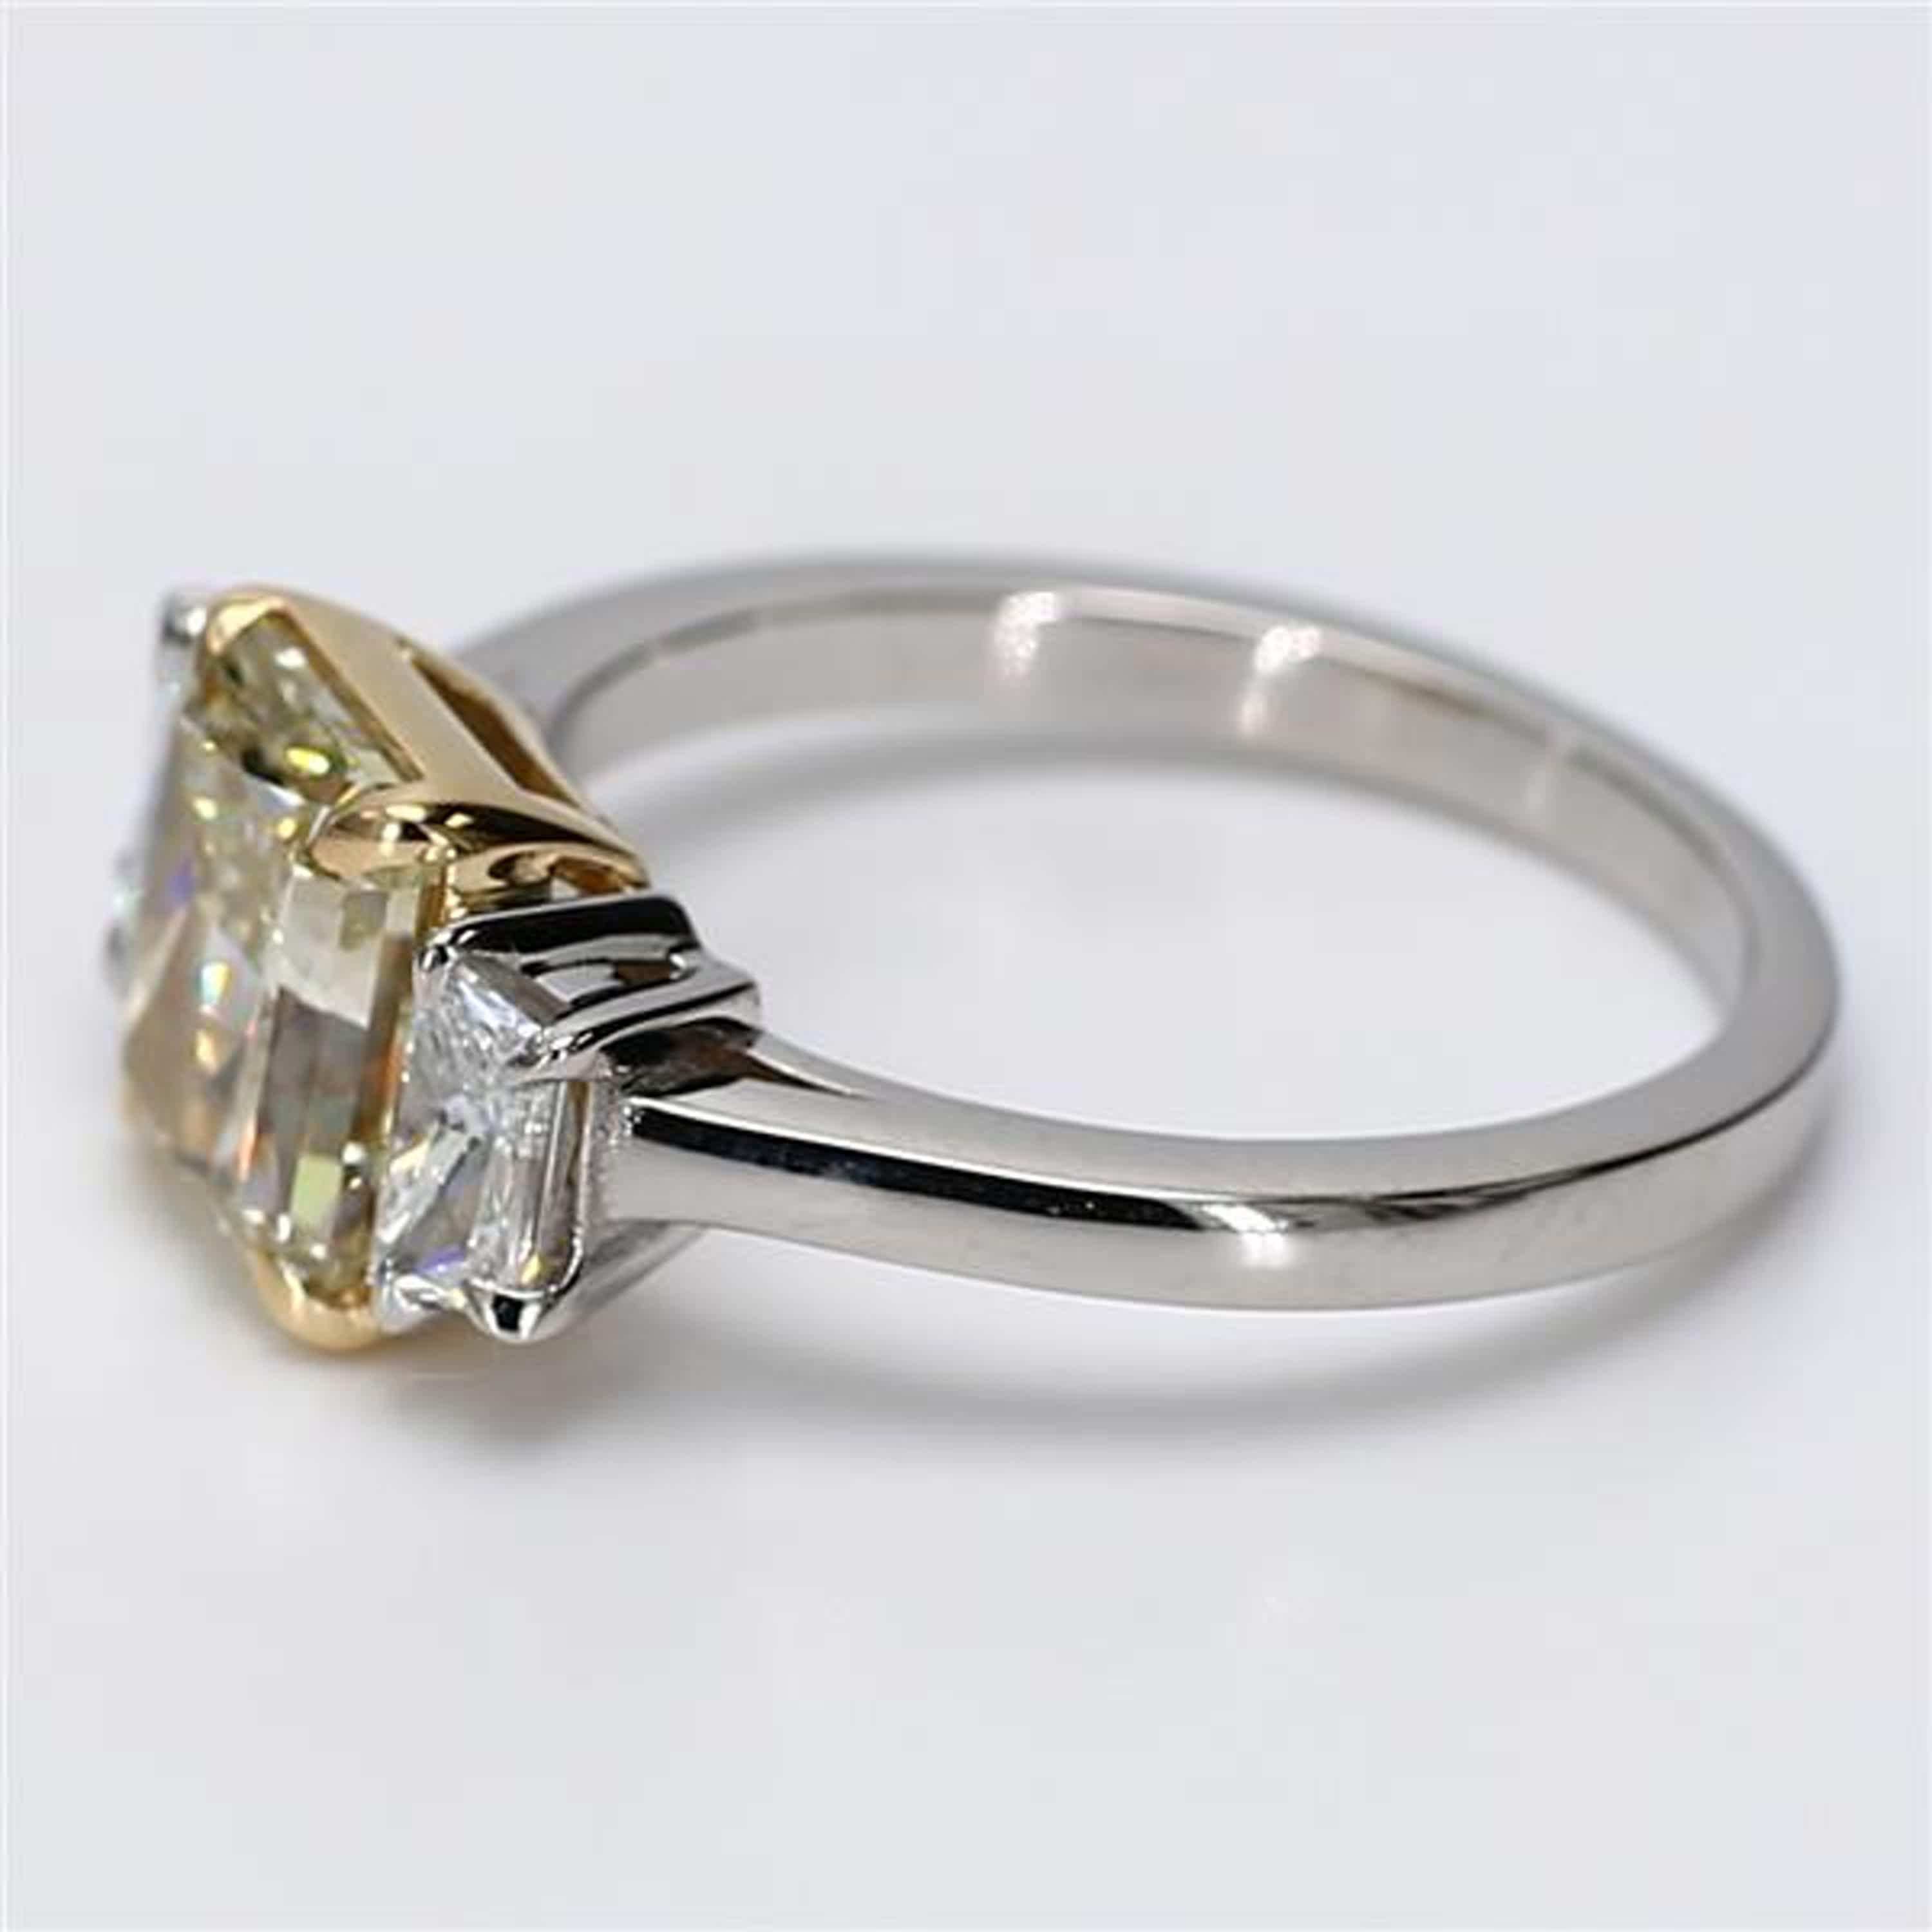 Contemporary GIA Certified Natural Yellow Radiant Diamond 3.08 Carat TW Plat Cocktail Ring